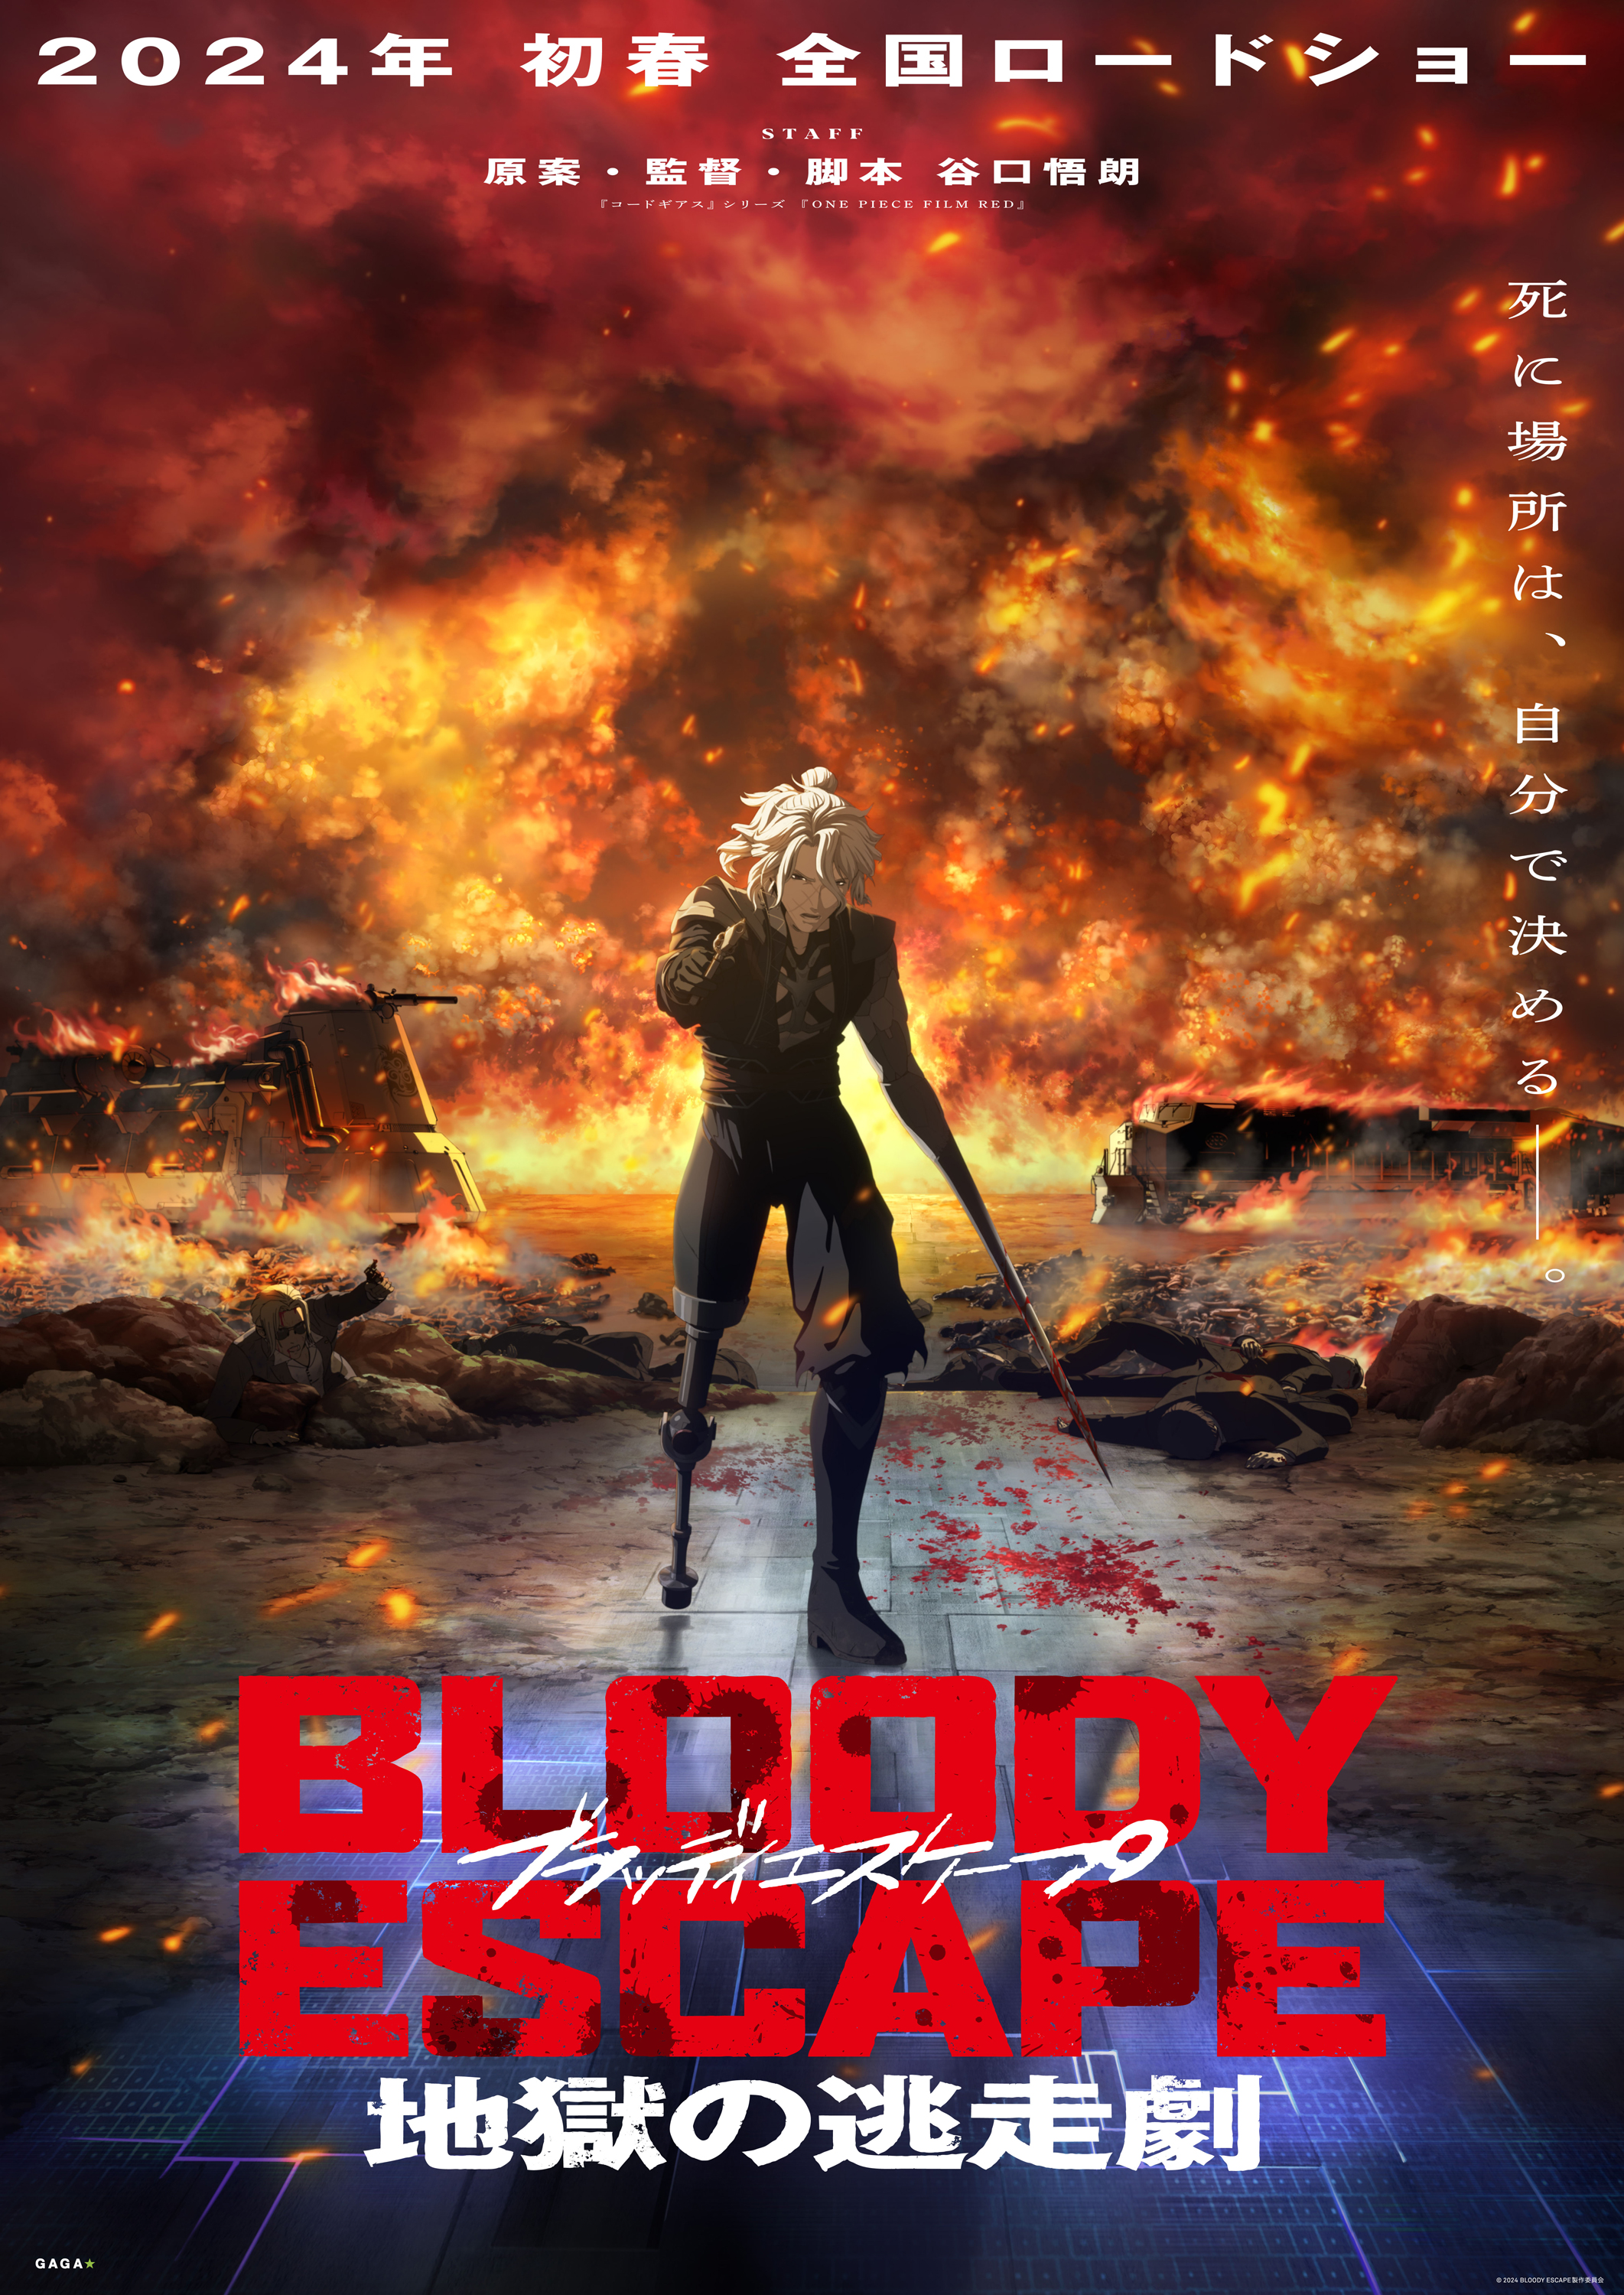 「BLOODY ESCAPE -地獄の逃走劇-」